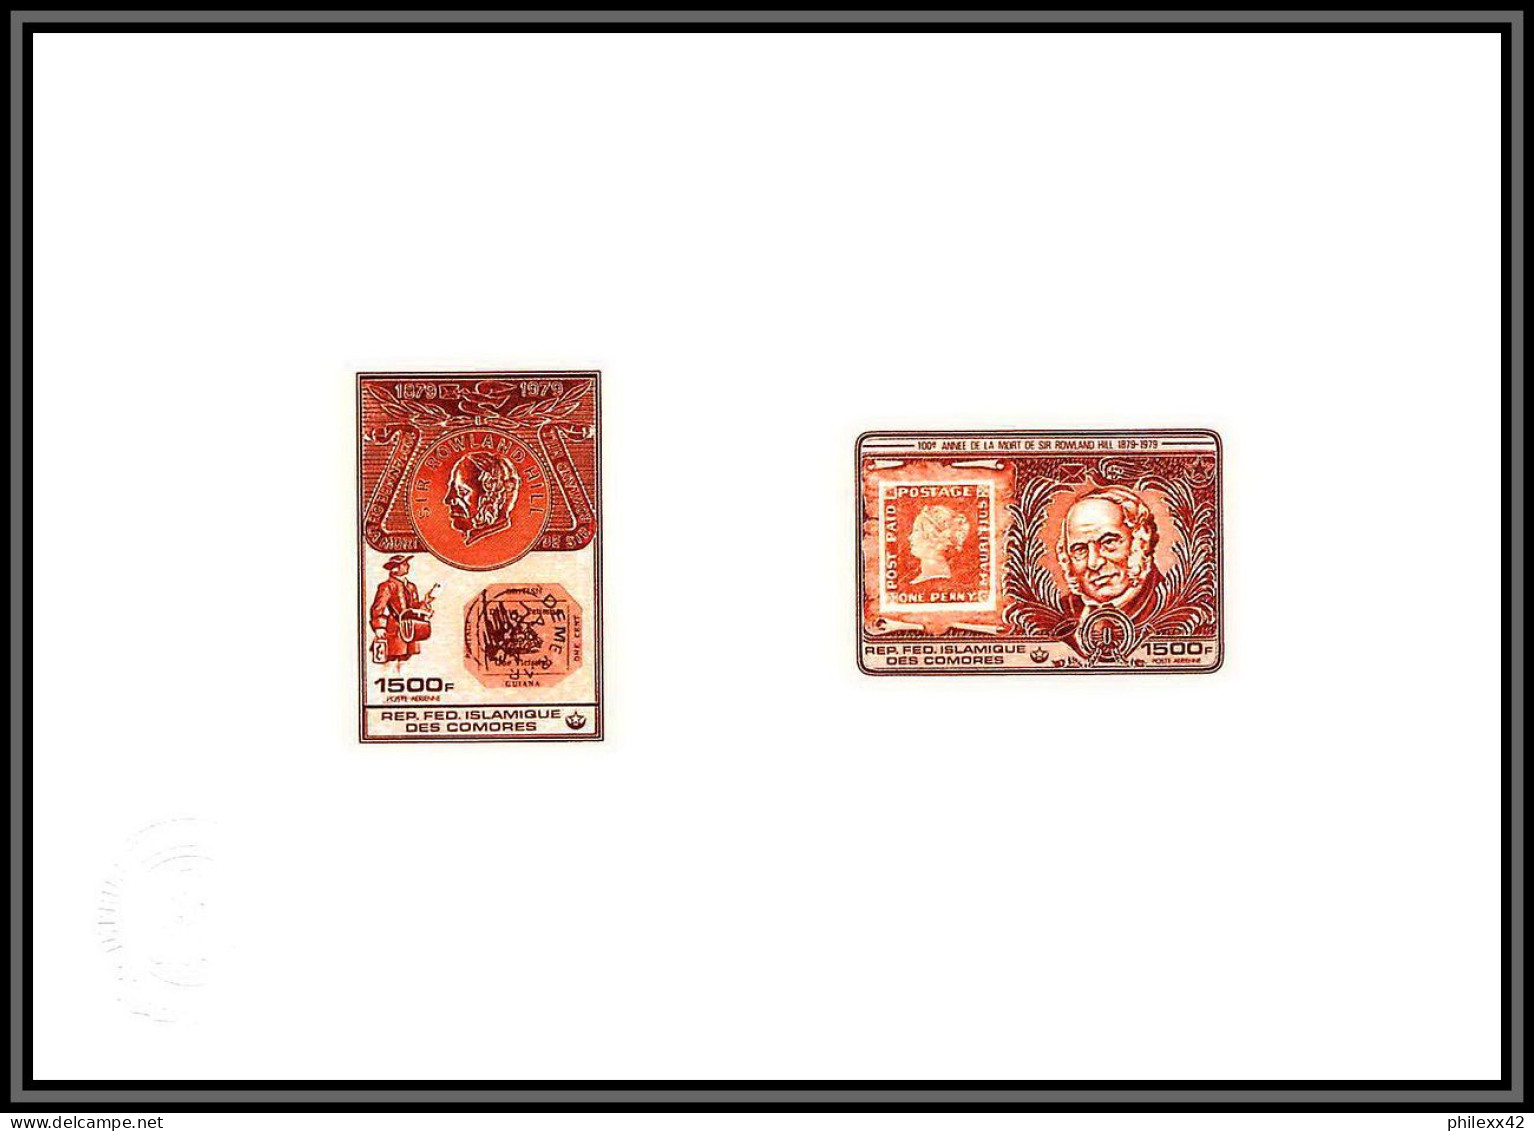 95231 BF N°199/N°501 Rowland Hill 1978 Penny Black Comores Comoros Epreuve D'artiste Collective Artist Proof Brown - Rowland Hill